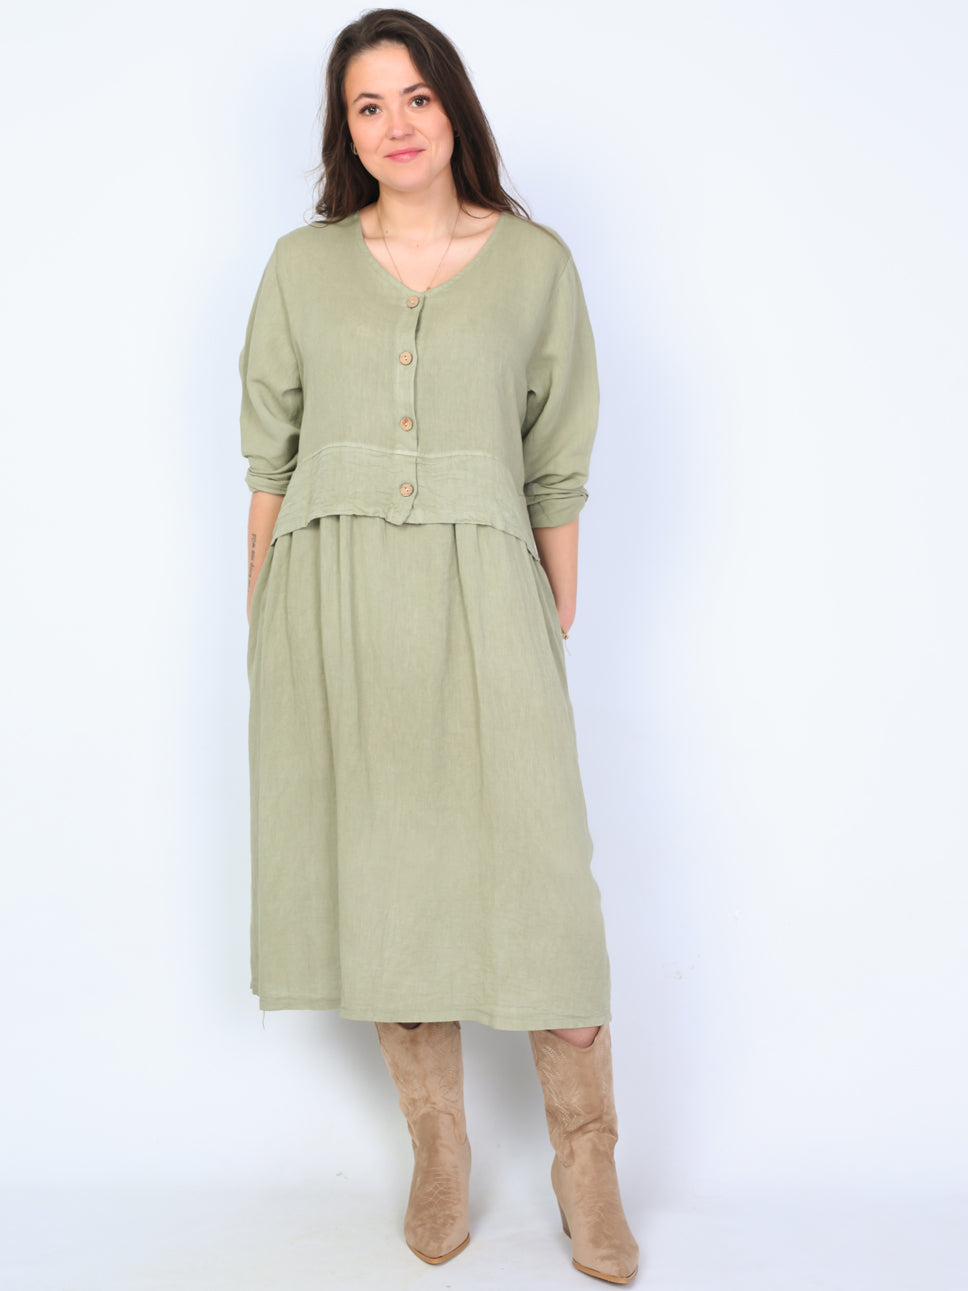 Krone 1 linen dress with buttons